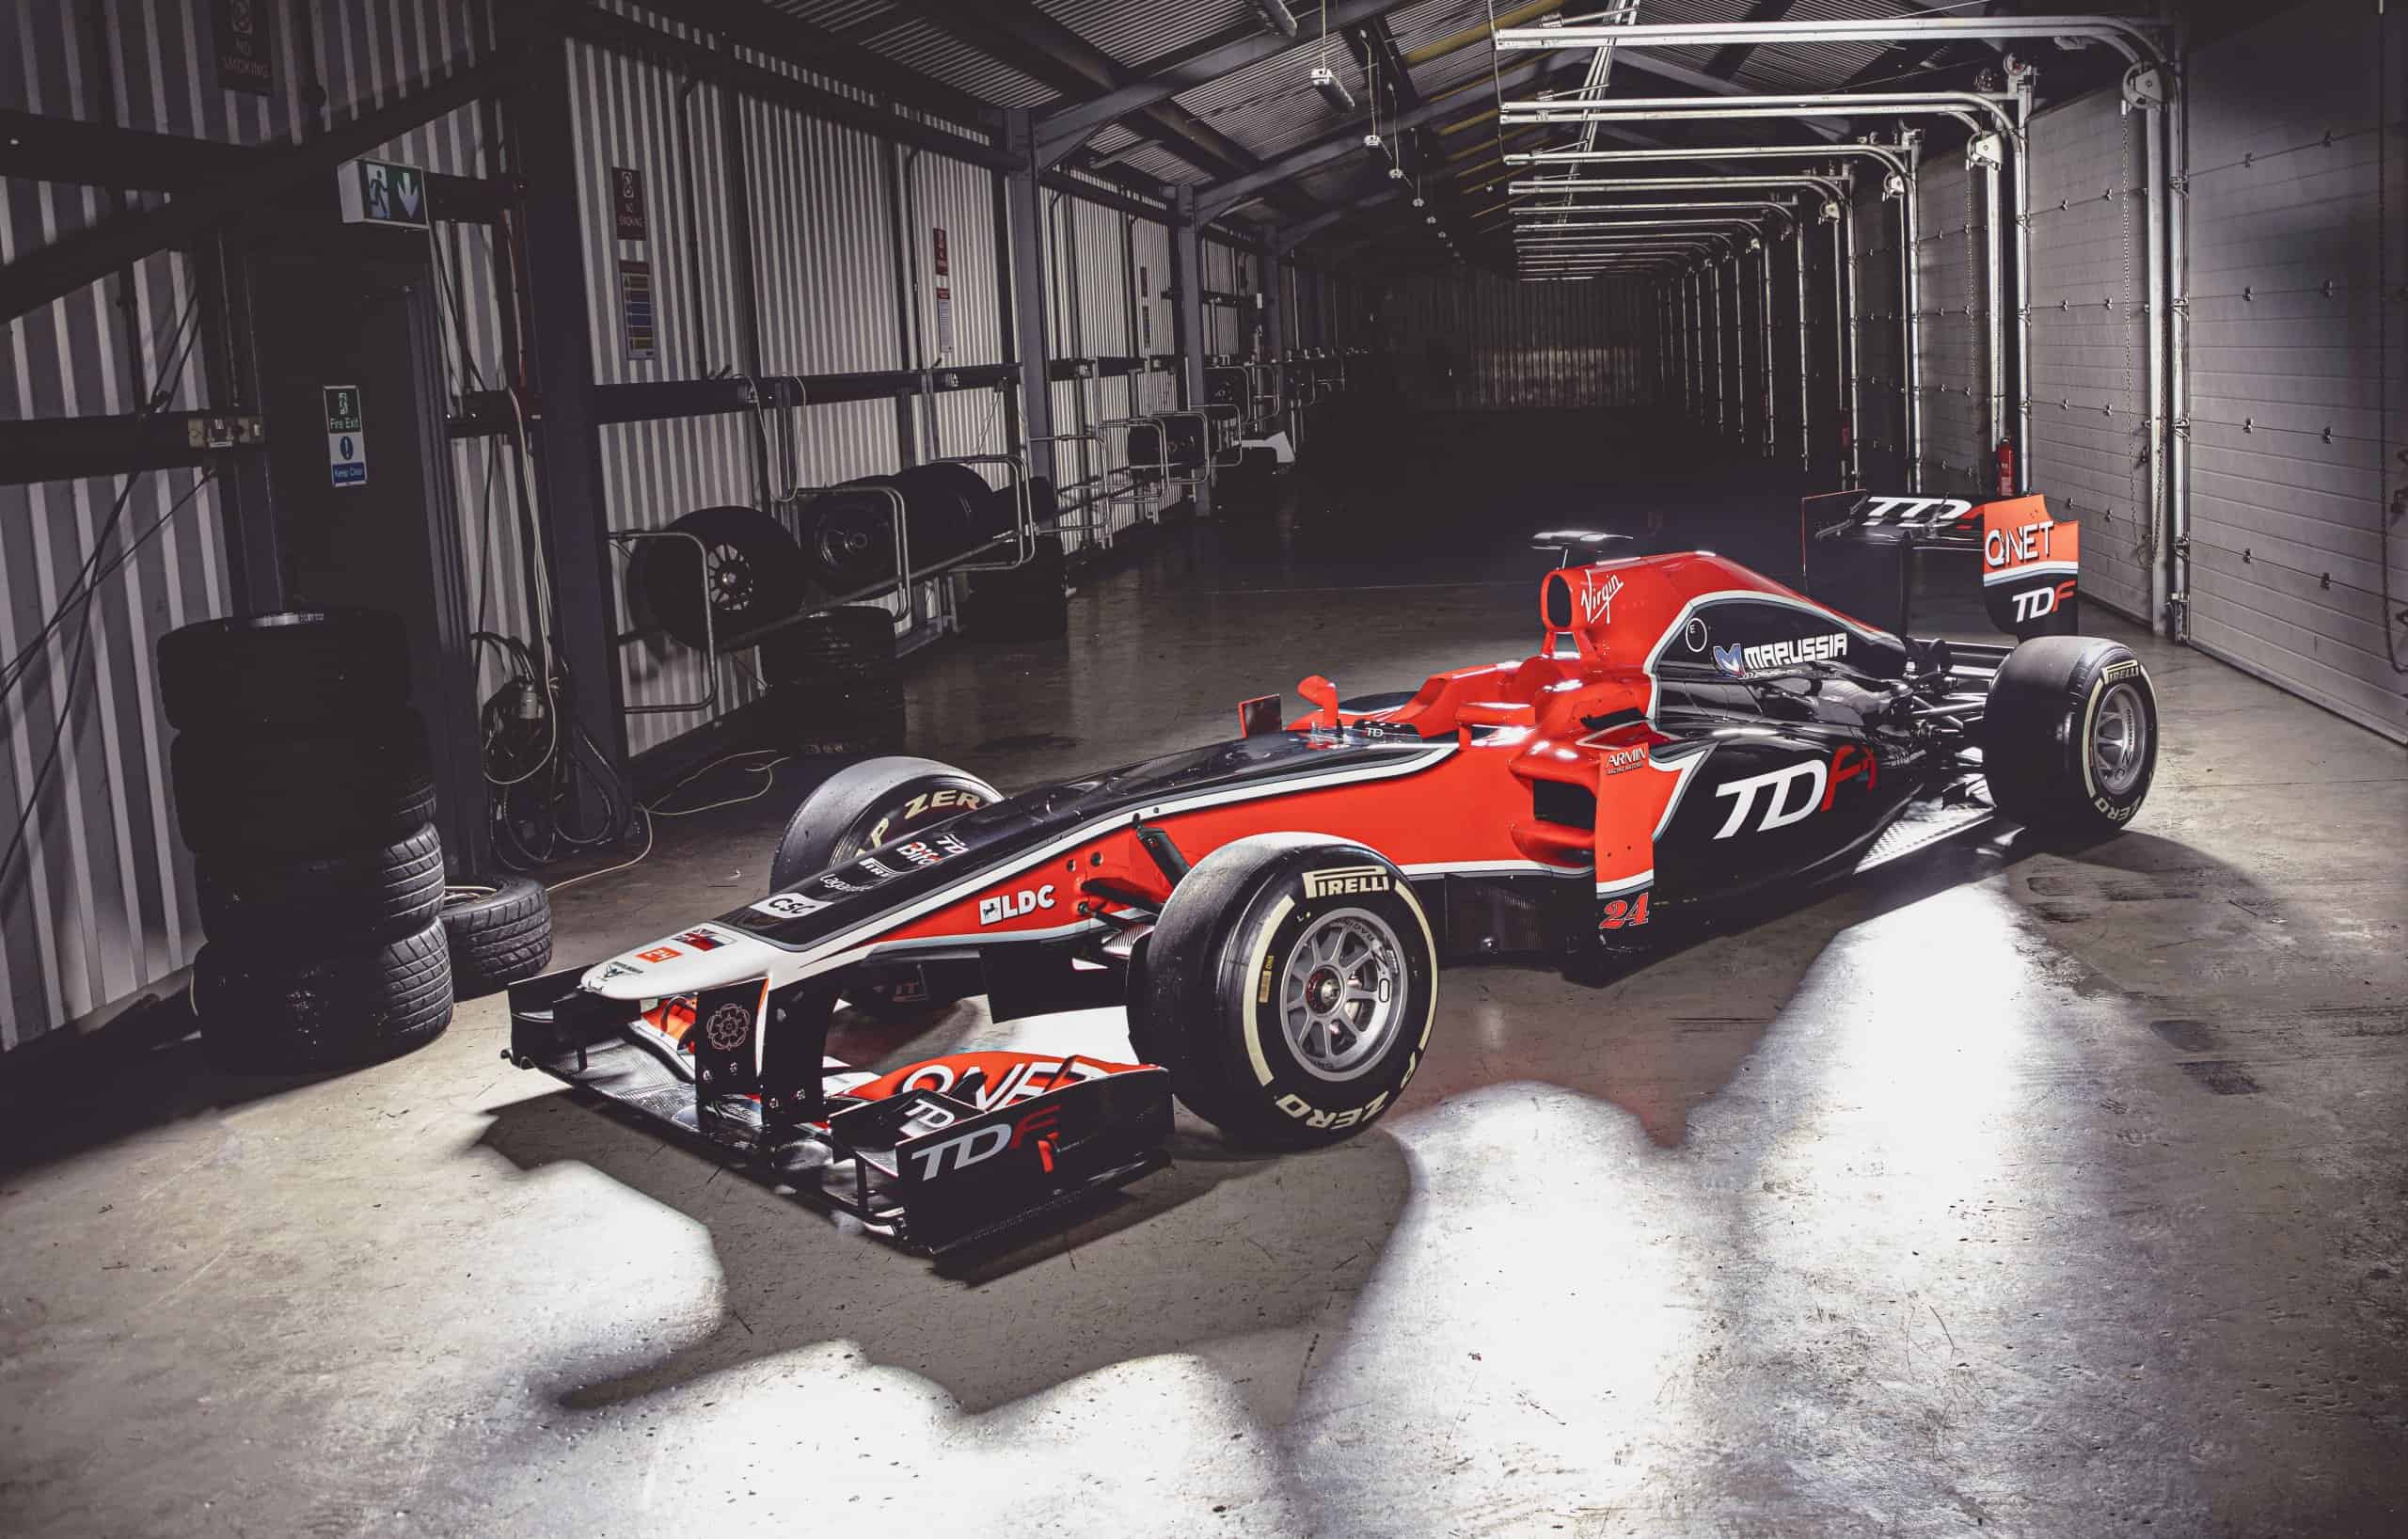 F1 car, Want to exercise your inner Senna? British company makes it easier to own an F1 car, ClassicCars.com Journal